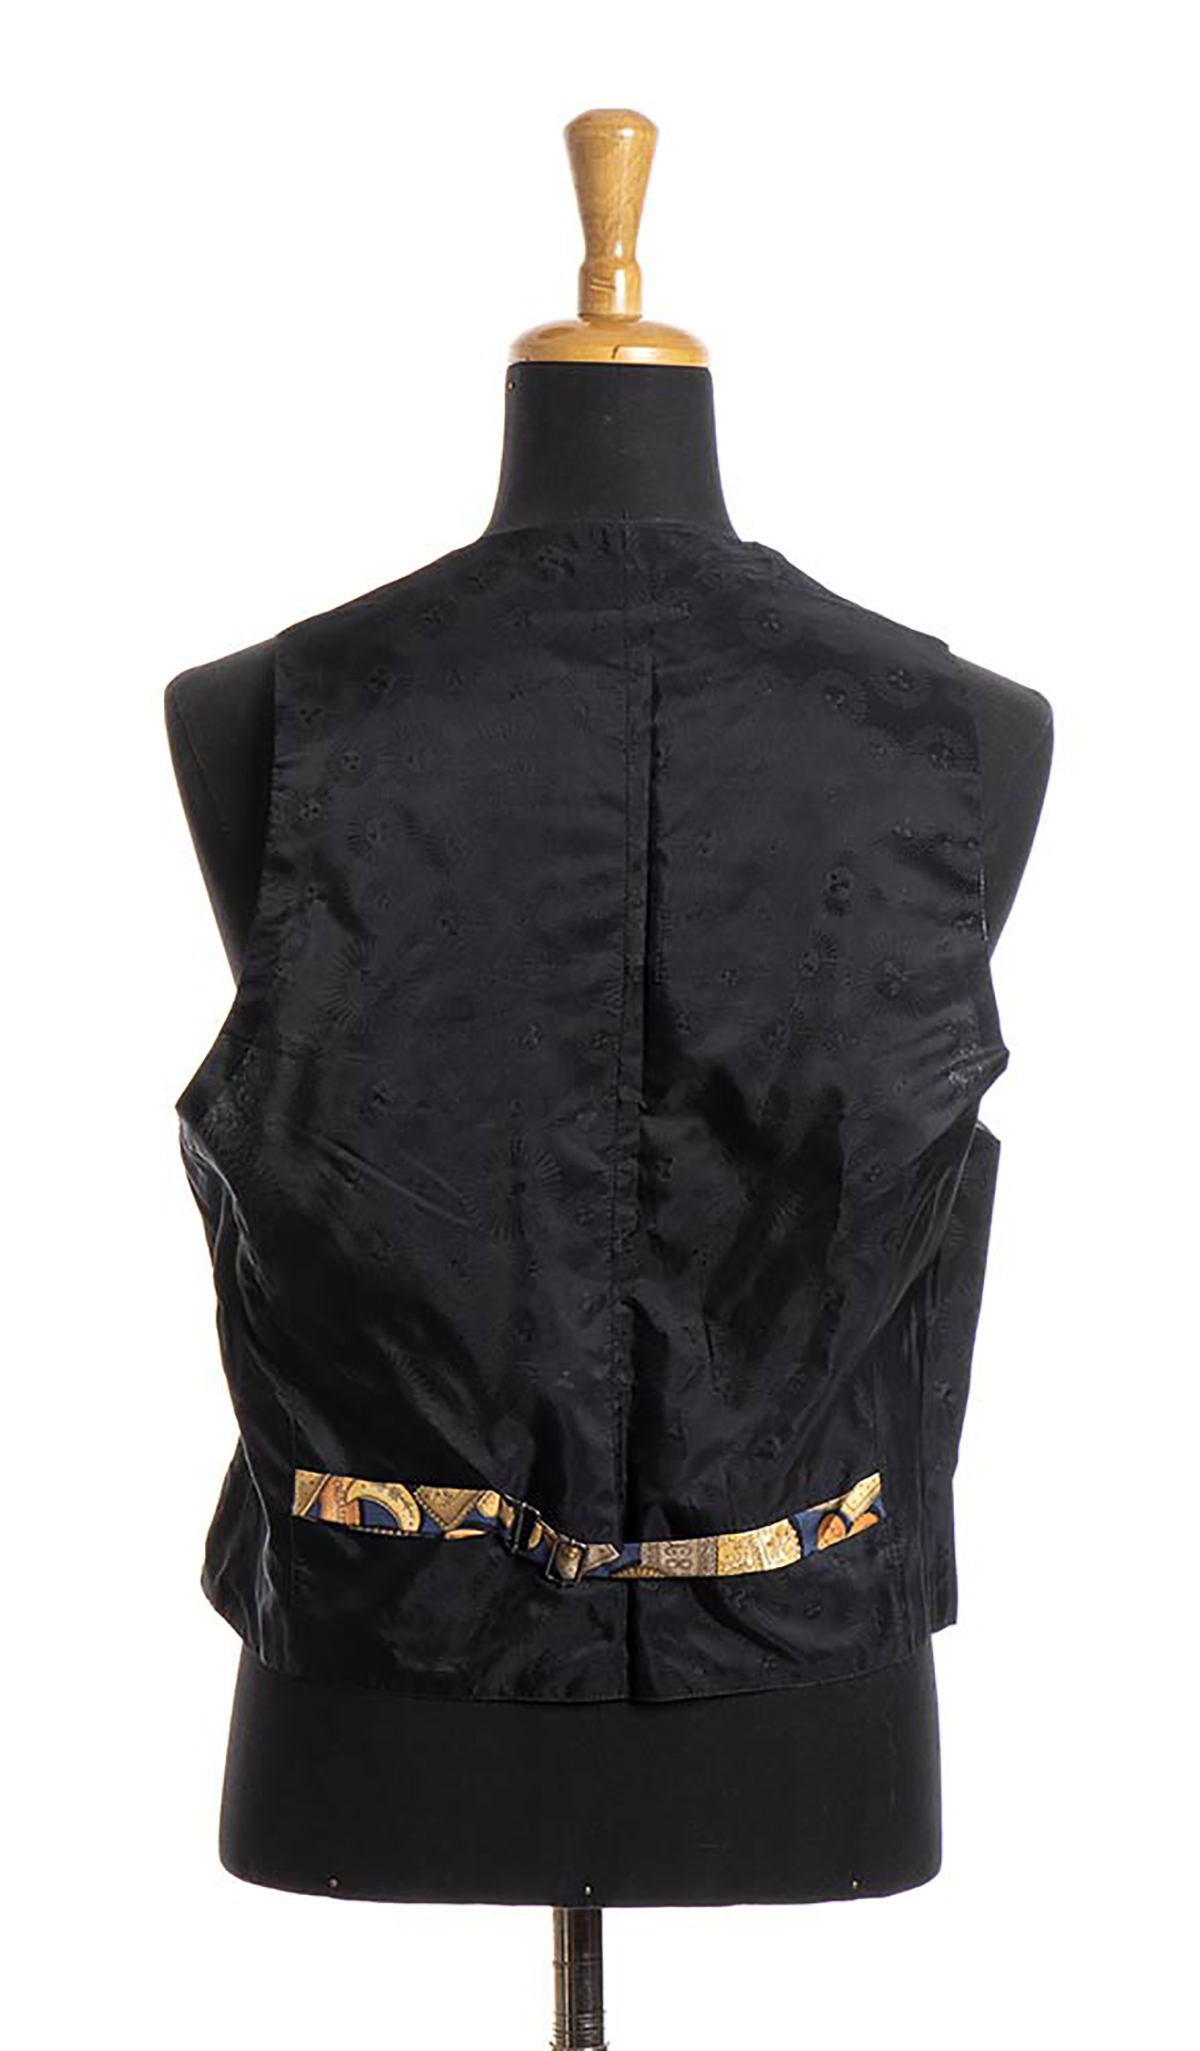 FORNASETTI SILK VEST 80s Silk vest with original box. General Conditions grading A (new with tag) - Image 3 of 5